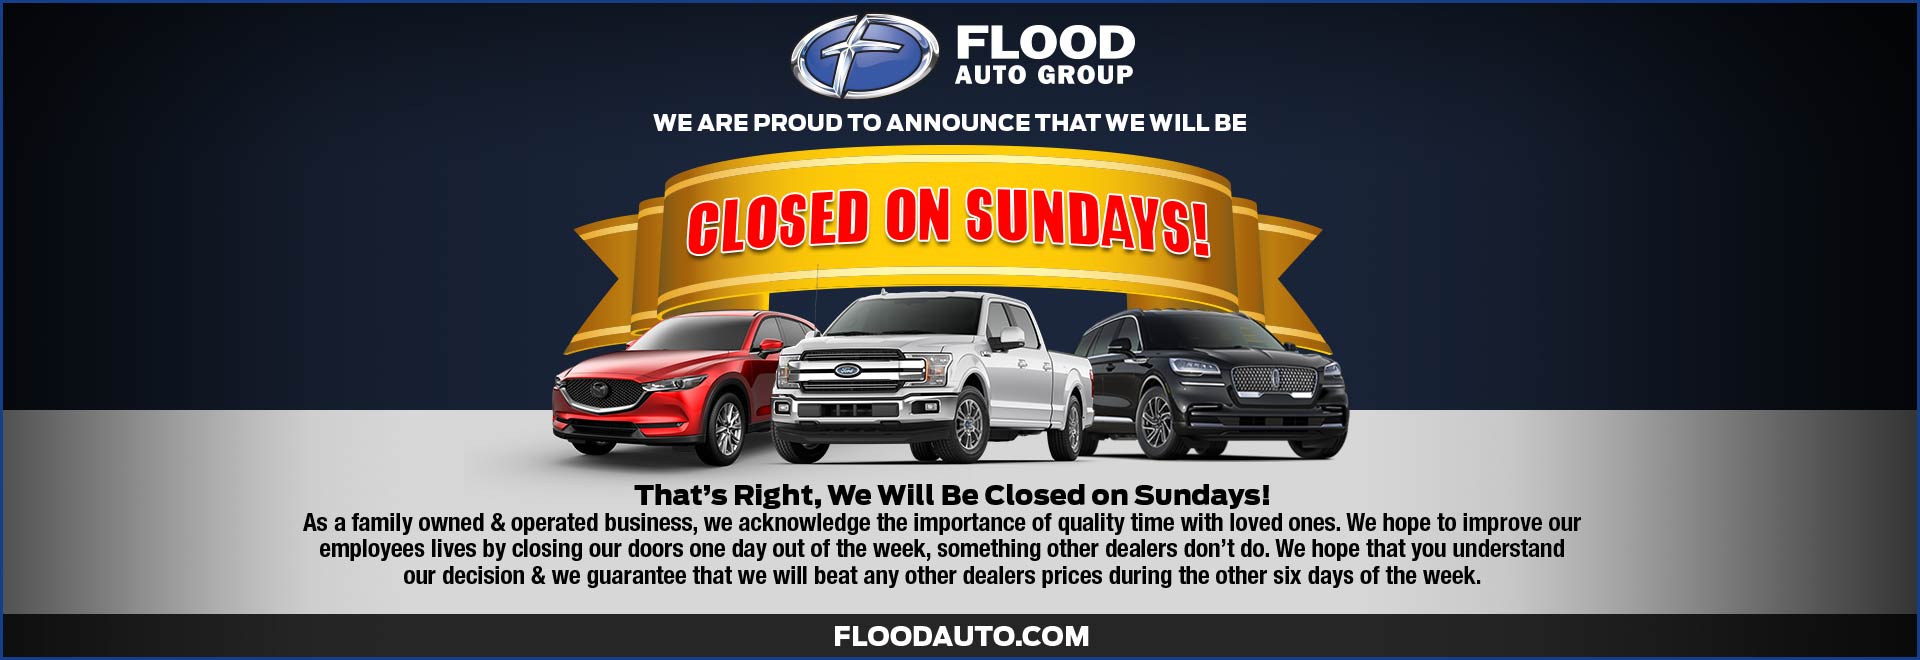 Flood Ford will be closed on Sundays